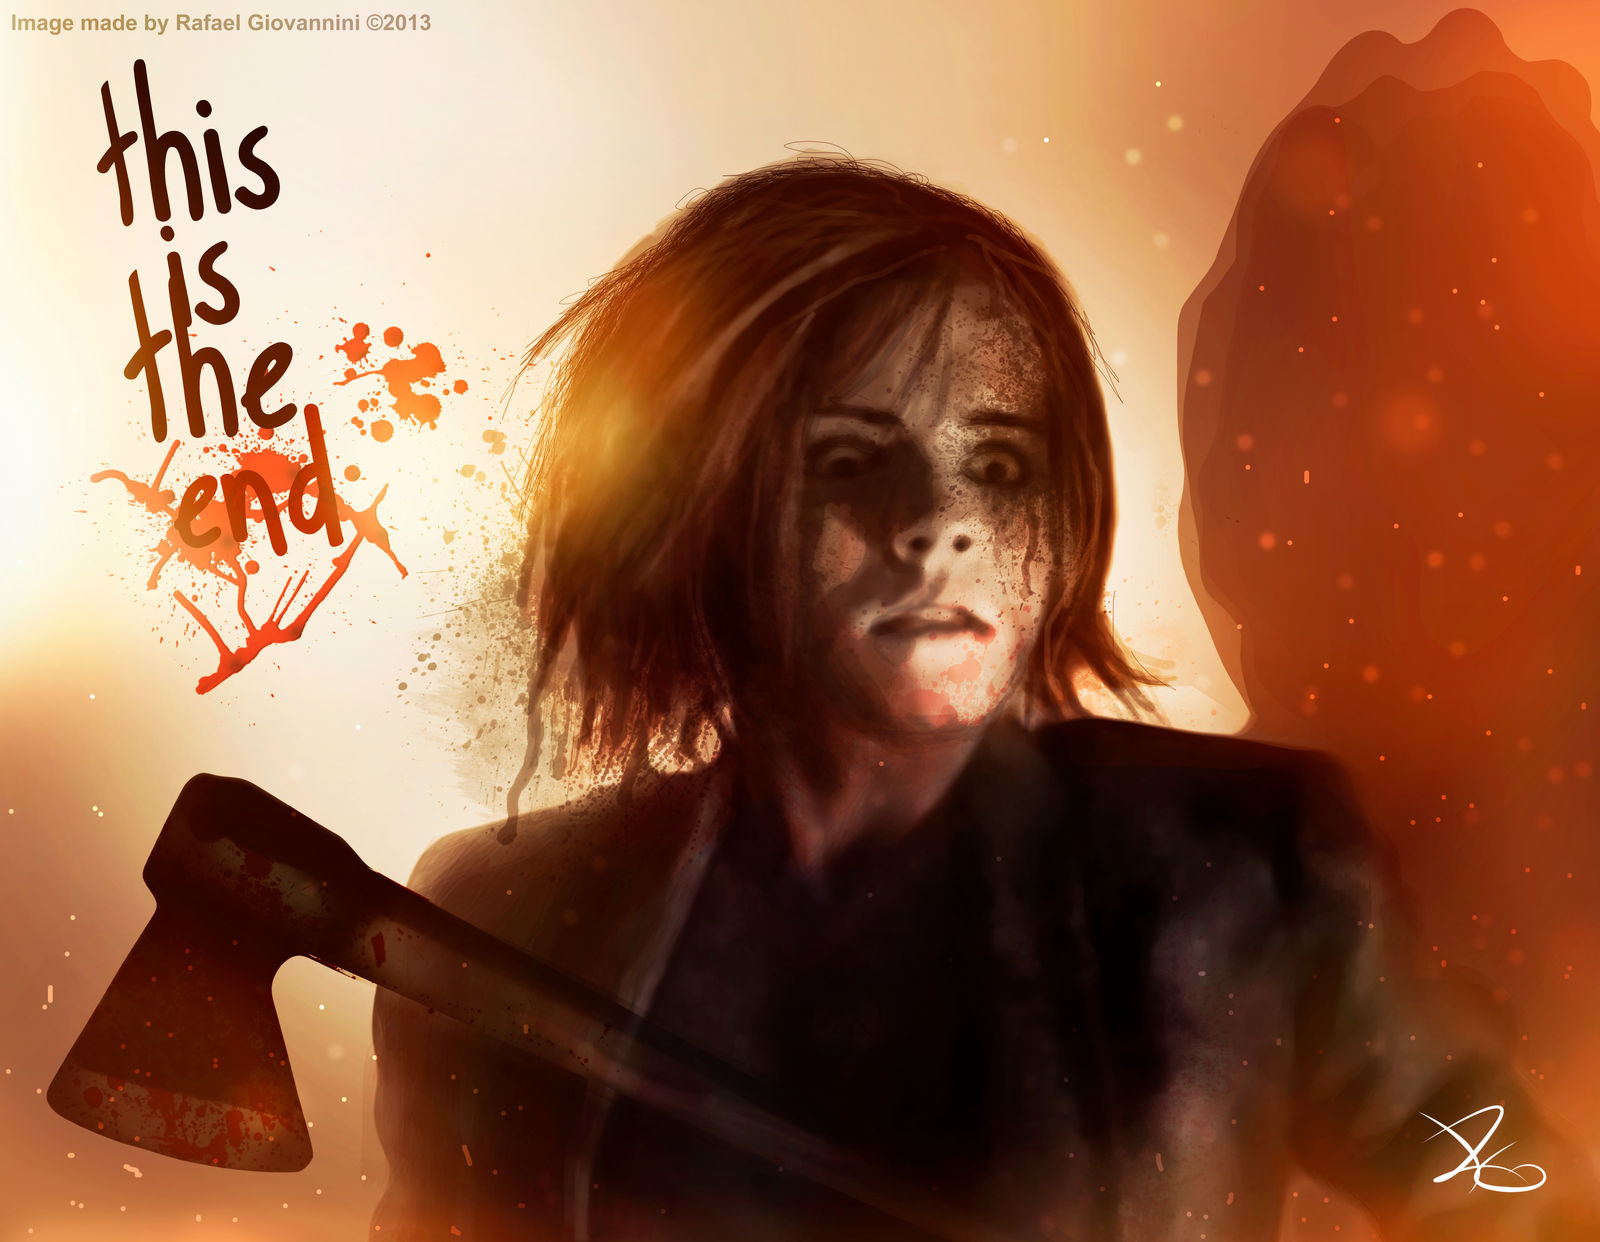 Emma Watson - This Is the End